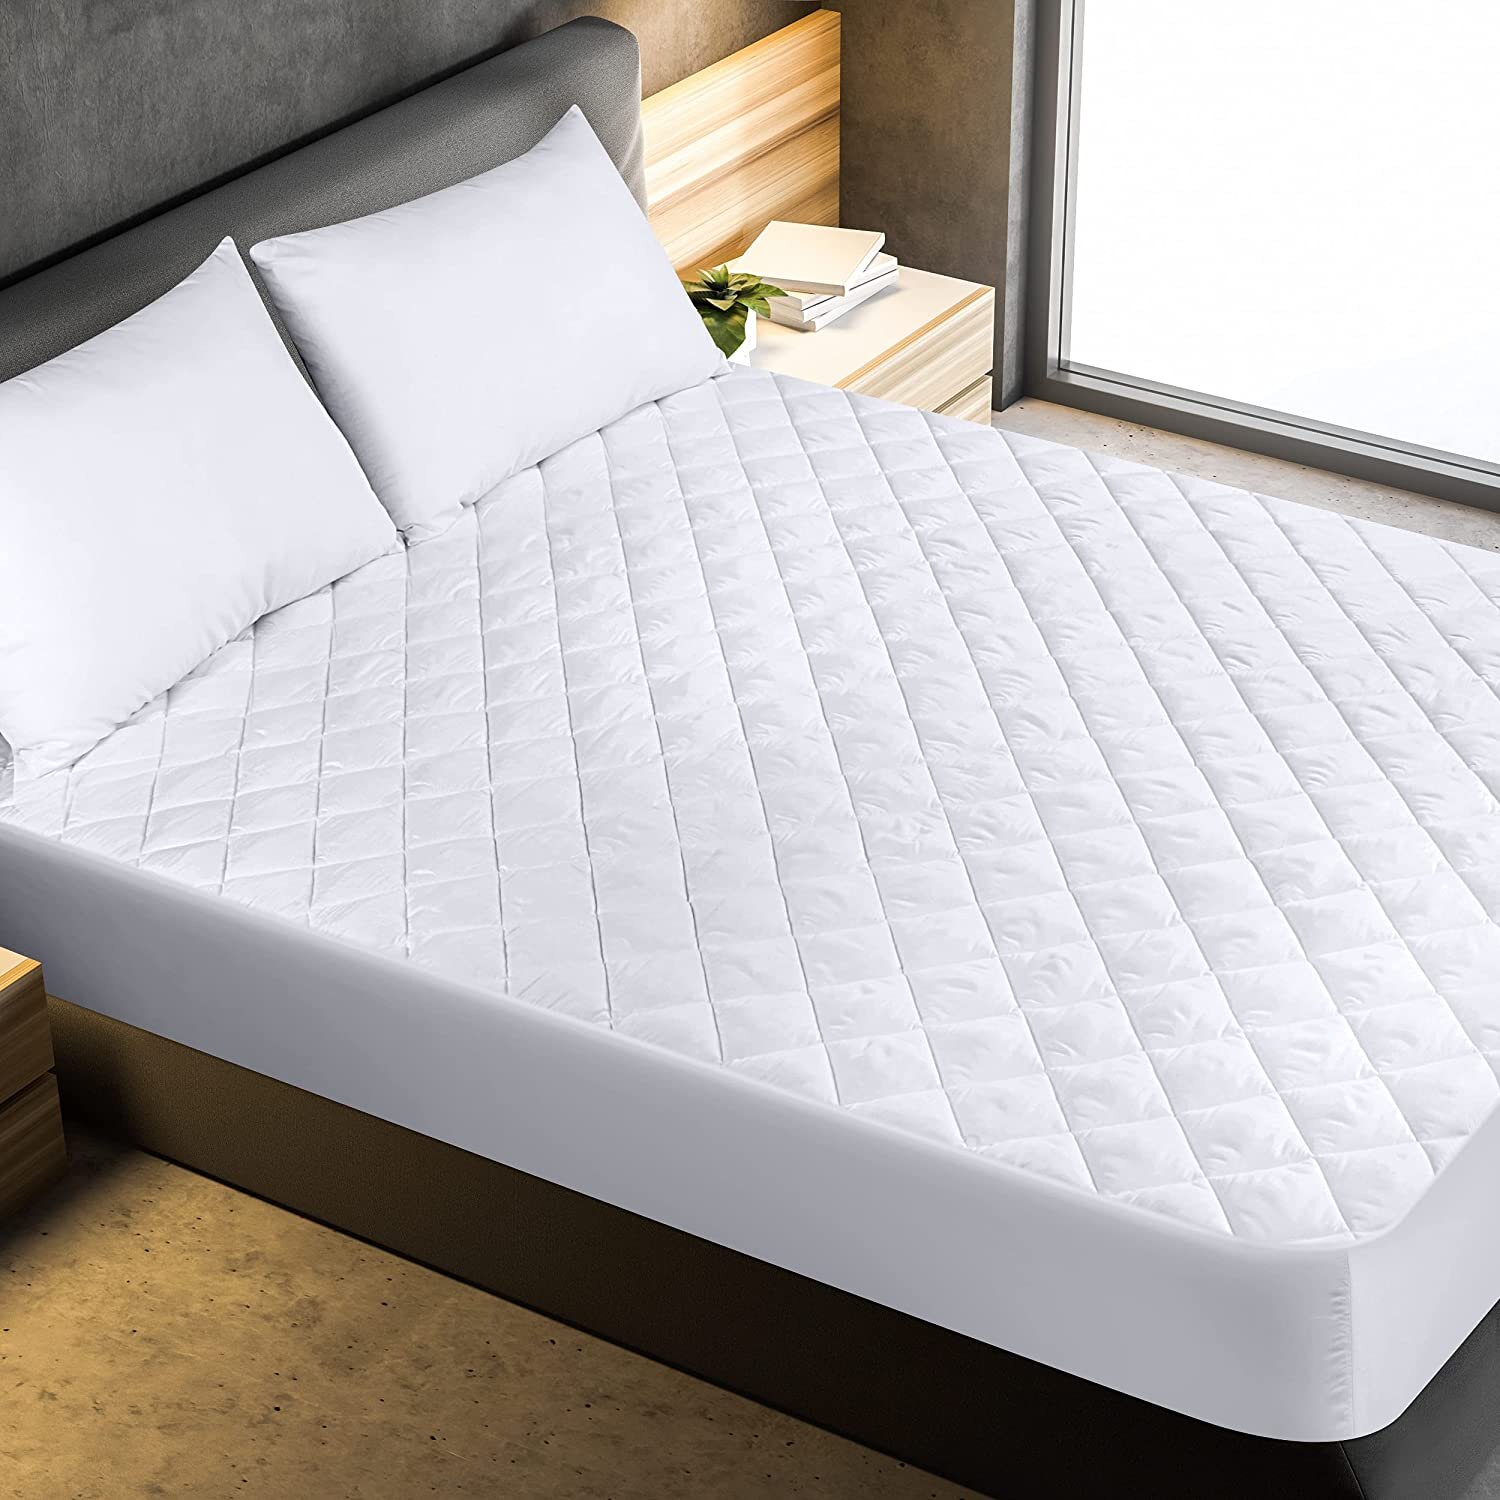 perspiration - Super-soft Preimum Bed Cover best for silent restful nights comfortable sleep Full Protects against allergens spills Breathable for cool Waterproof Mattress Pad